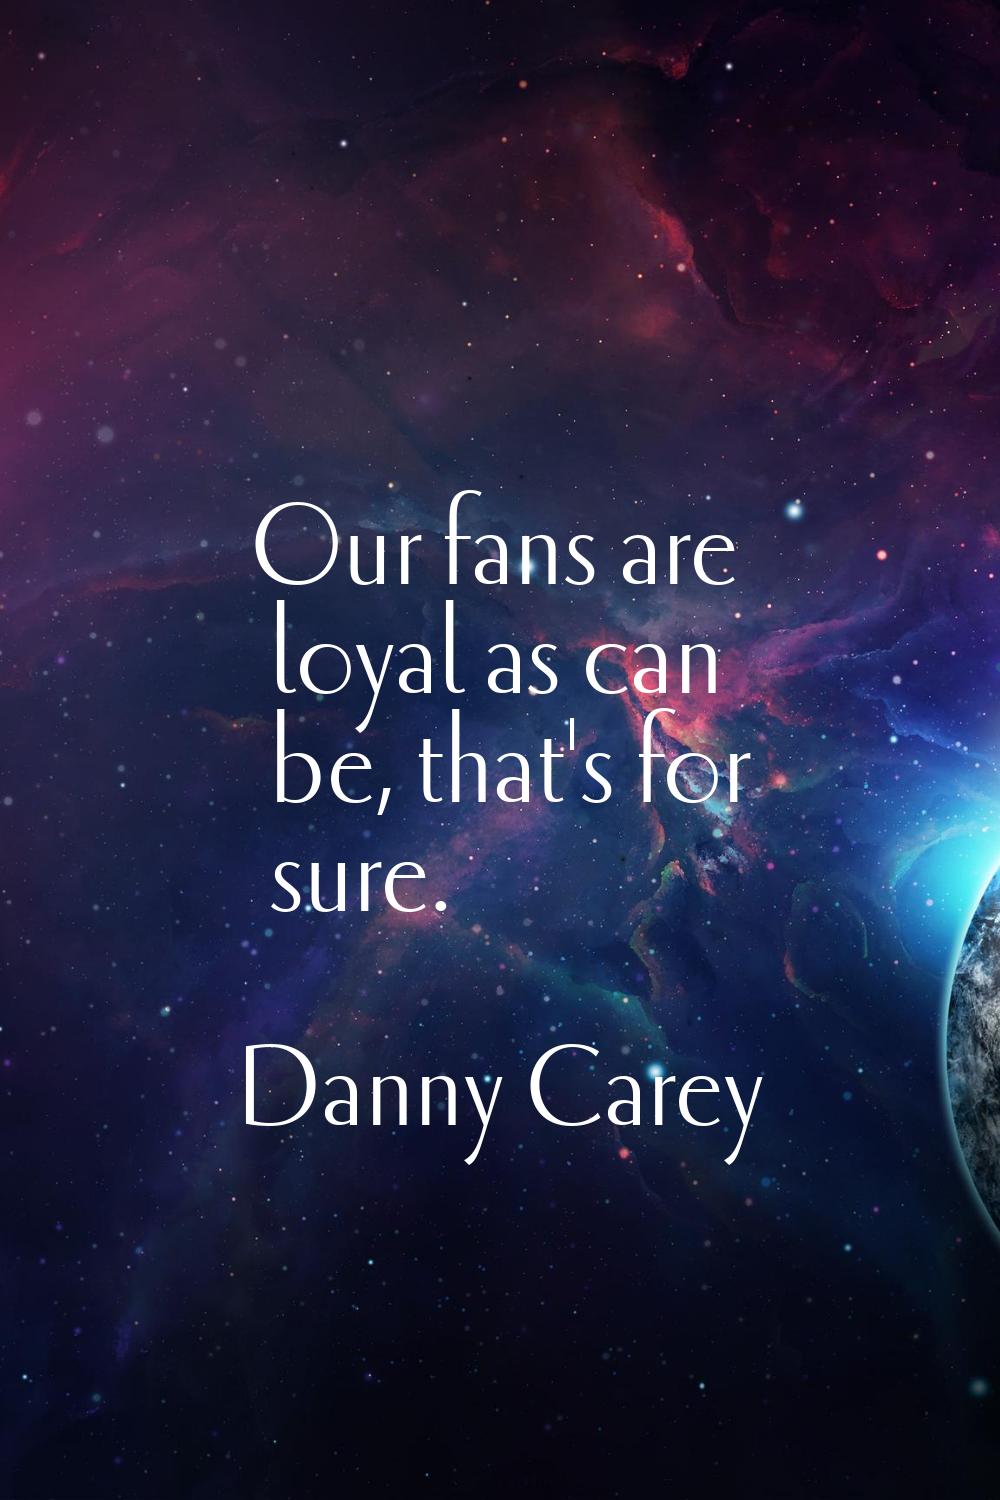 Our fans are loyal as can be, that's for sure.